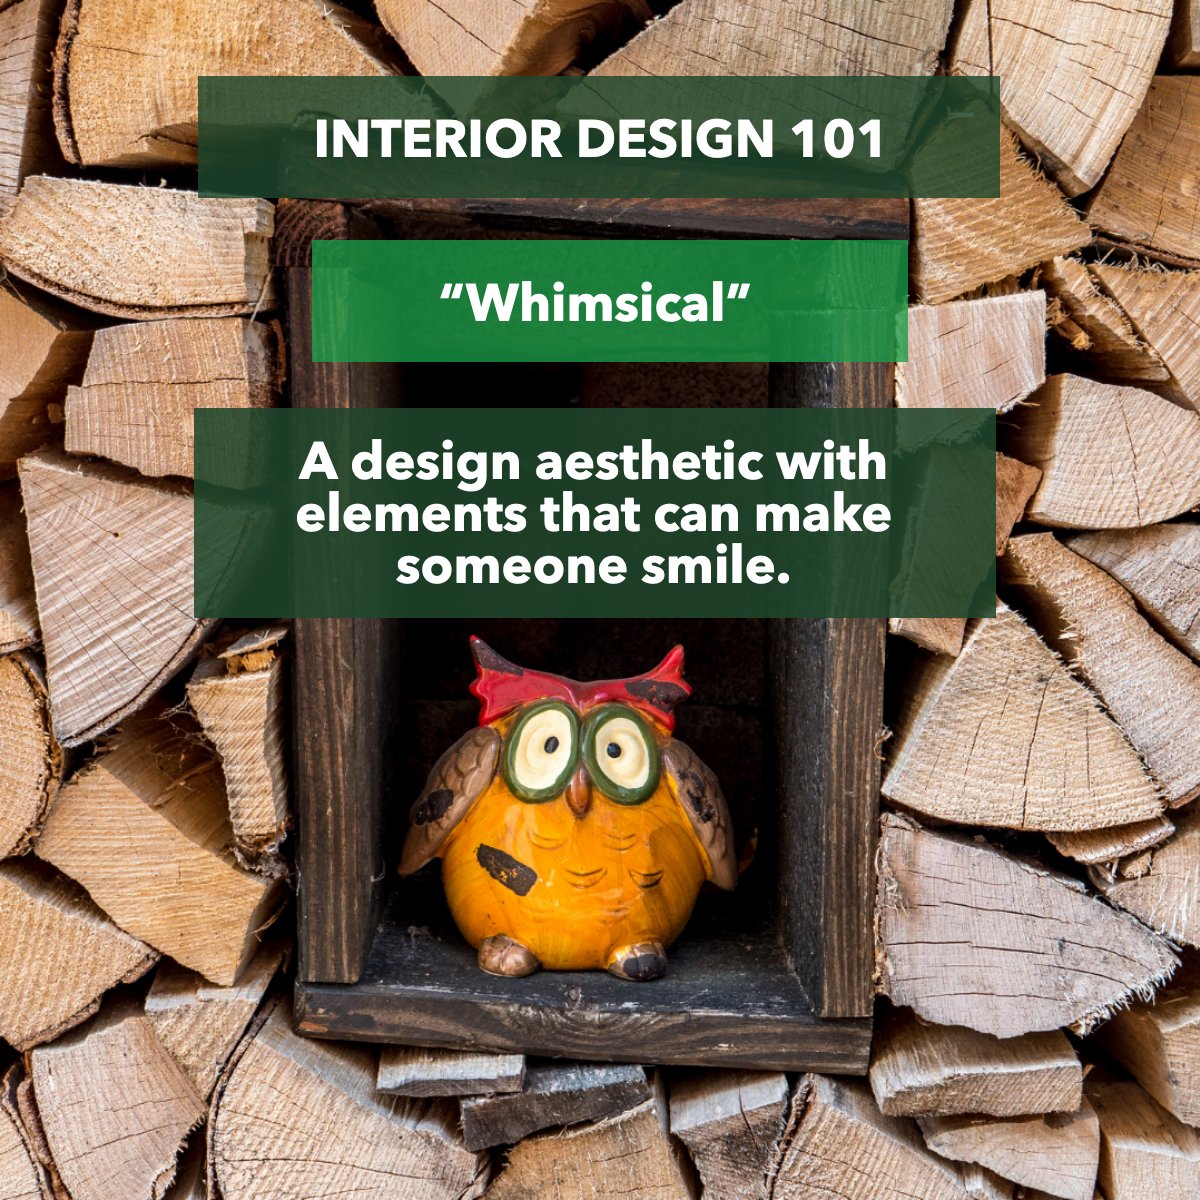 Design aesthetics can evoke emotions.

Have you ever heard about the whimsical aesthetic? 👍

#interiorsdesign #interiortrends #interiordesigning #interiordesigntrends #interiorsaddict #interiordesigntips #interiordesigngoals 

 #dreamhome #homeowner #goals